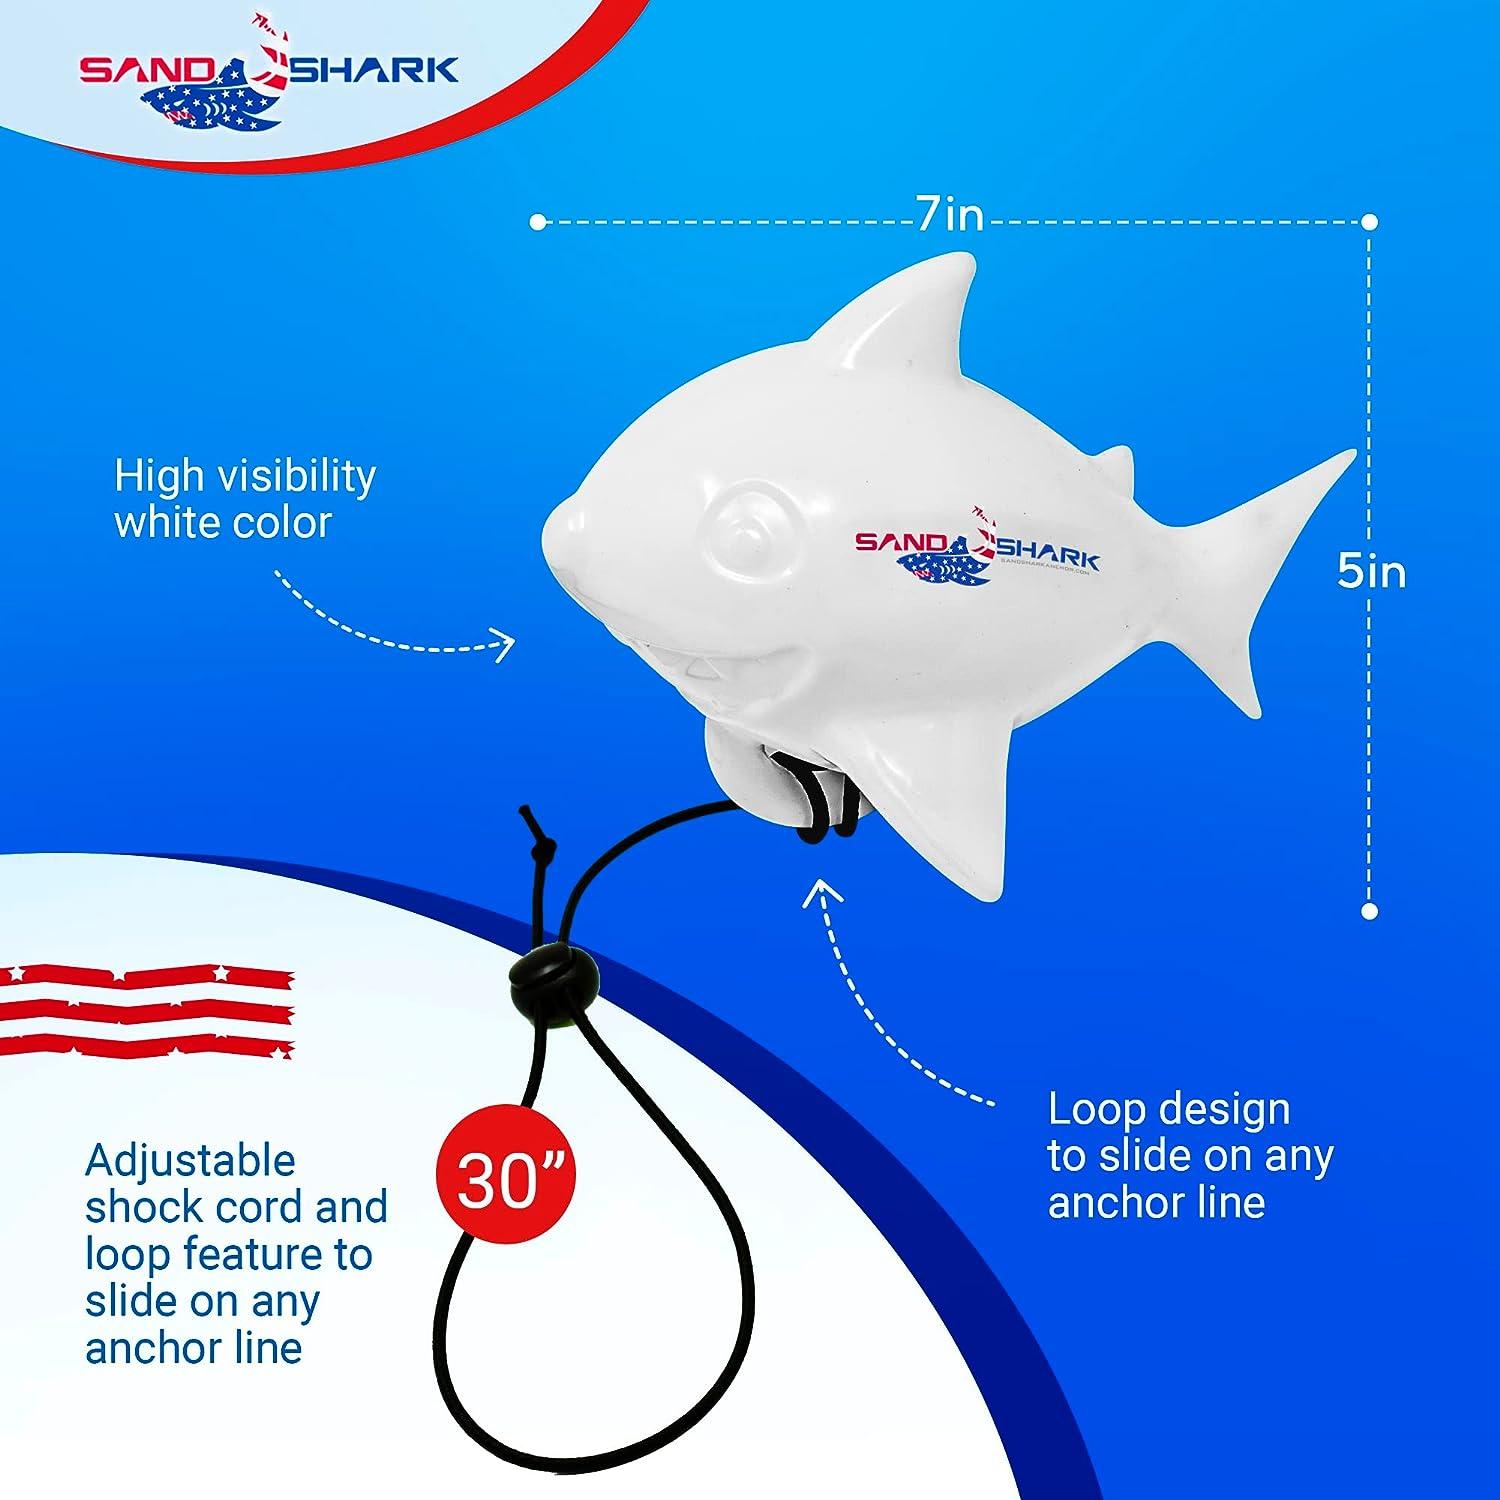 Premium Floating Anchor Marker Buoy by SandShark. High Visibility Markers  for Anchors at The Beach, Lake, Shallow Water, Sandbar, Find Your Anchor  (Red White Blue)